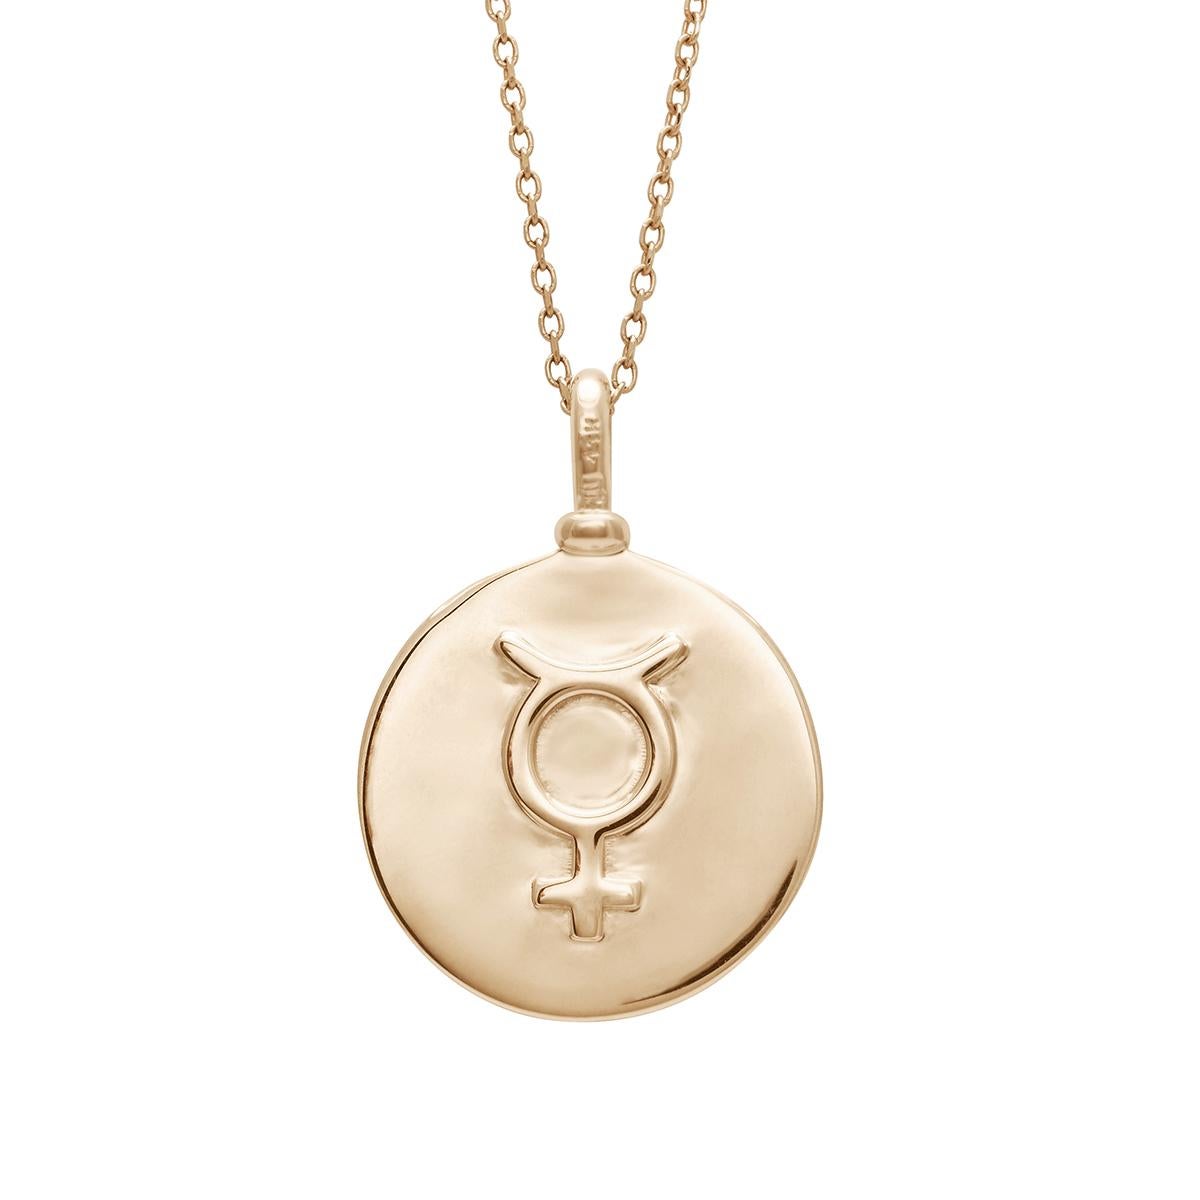 18mm, 14k yellow gold pendant with Virgo sign and 0.15 ctw white diamond (13 stones) constellation. The back of the pendant holds Virgo's ruling planet, Mercury. 16